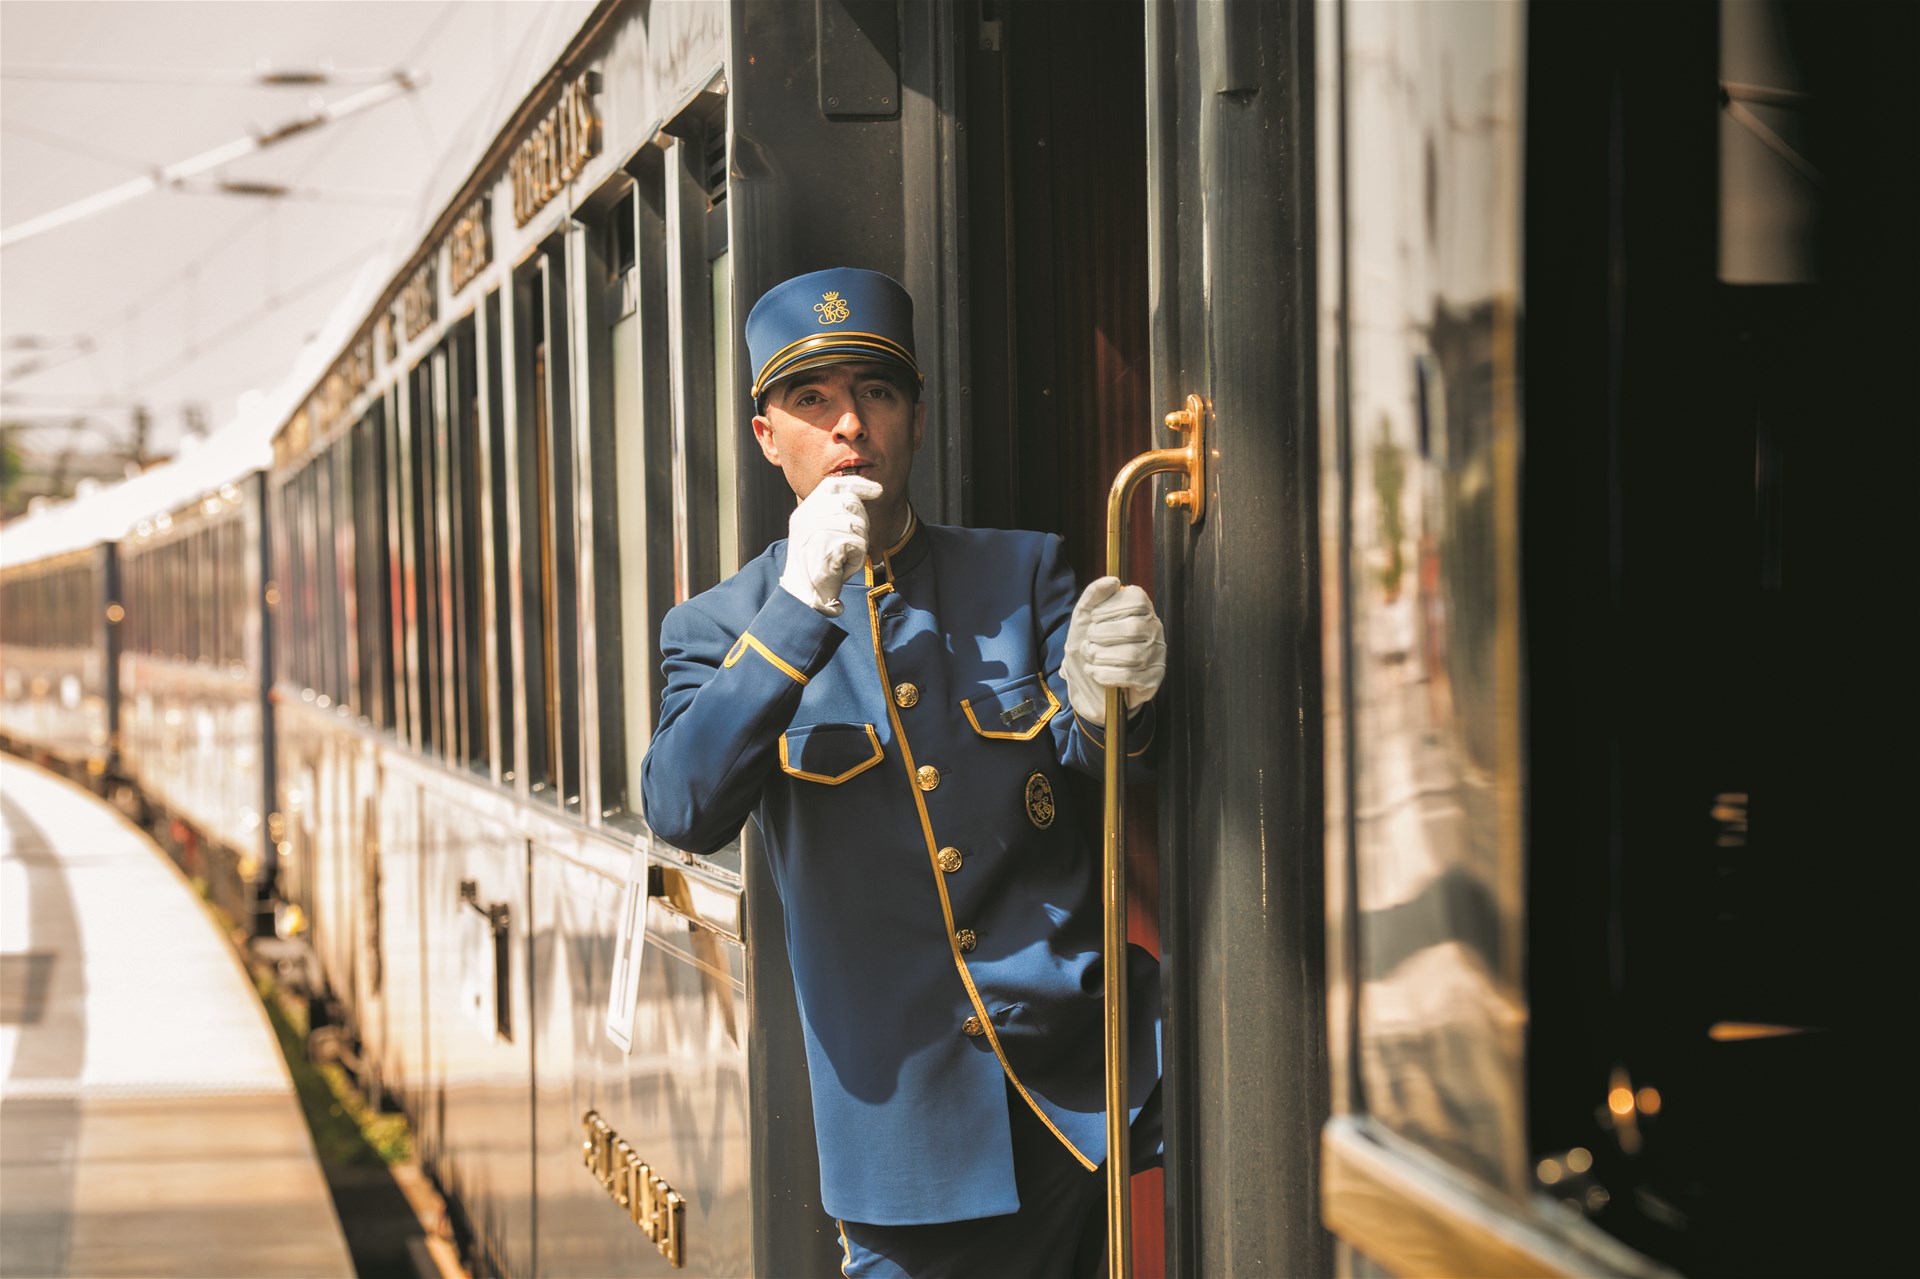 New Routes on the Venice Simplon-Orient-Express in 2021